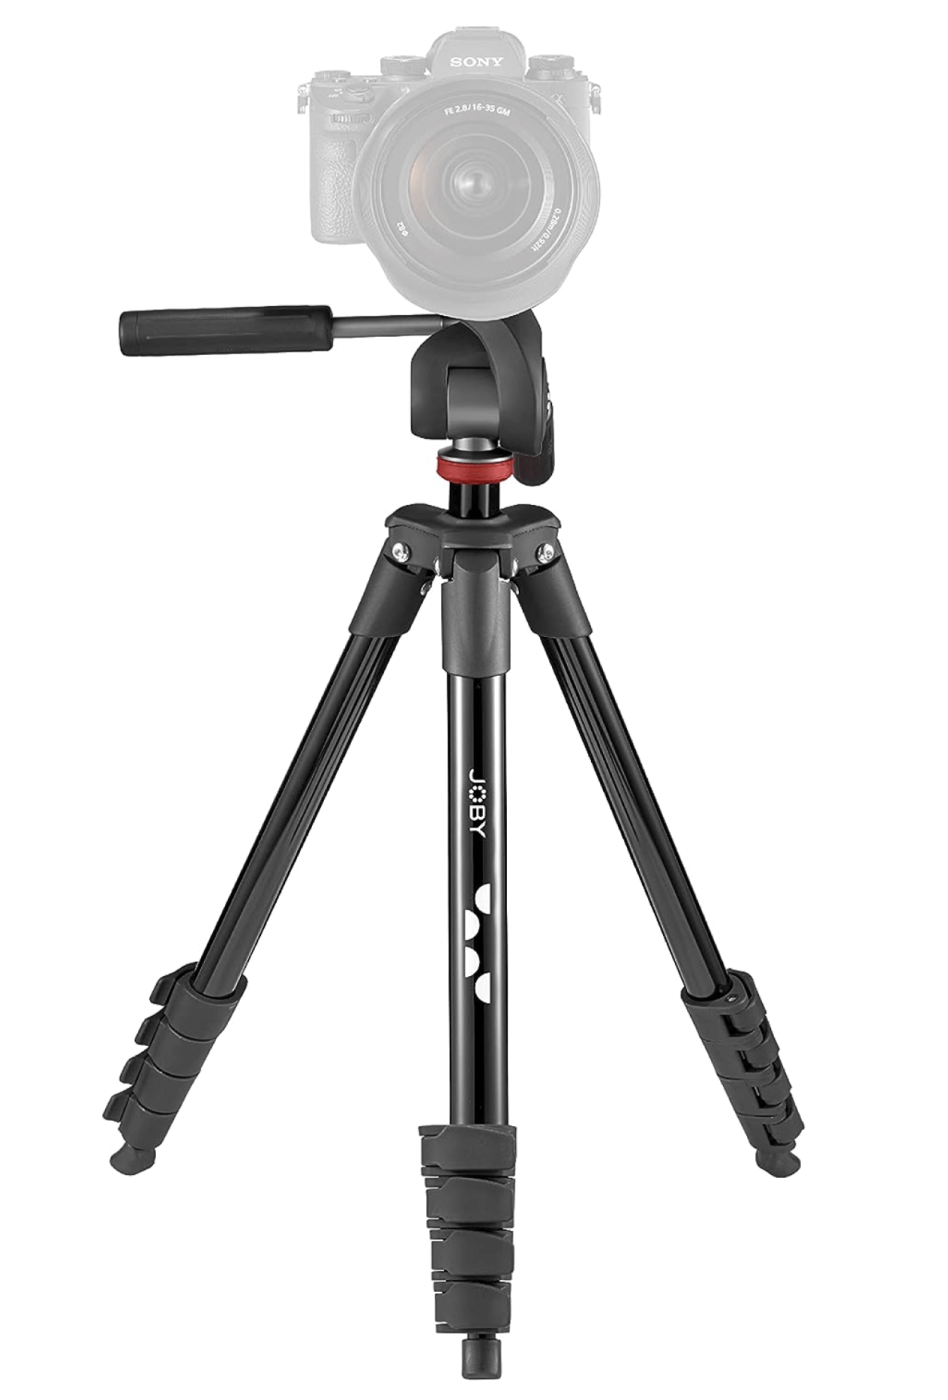 Tripod used for jewelry photography.